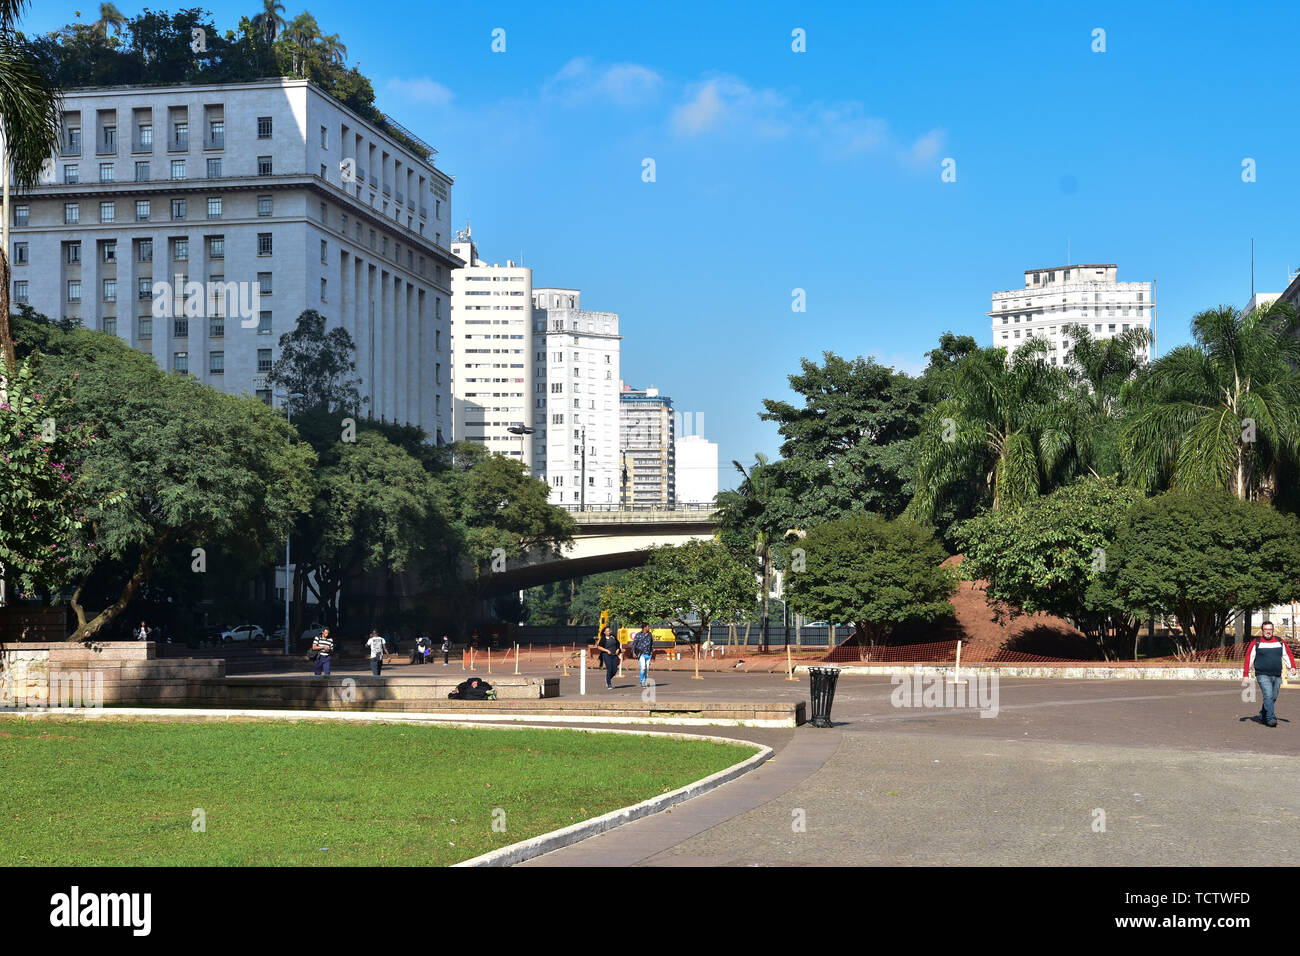 SÃO PAULO, SP - 10.06.2019: REQUALIFICAÇÃO DO VALE DO ANHANGABAÚ - Works of requalification of the Valley of the Anhangabaú, this Monday (10) the place will receive cafes, floricultures, toilets, playroom, among other activities that will make part of the daily life of the Va (Photo: Roberto Casimiro/Fotoarena) Stock Photo